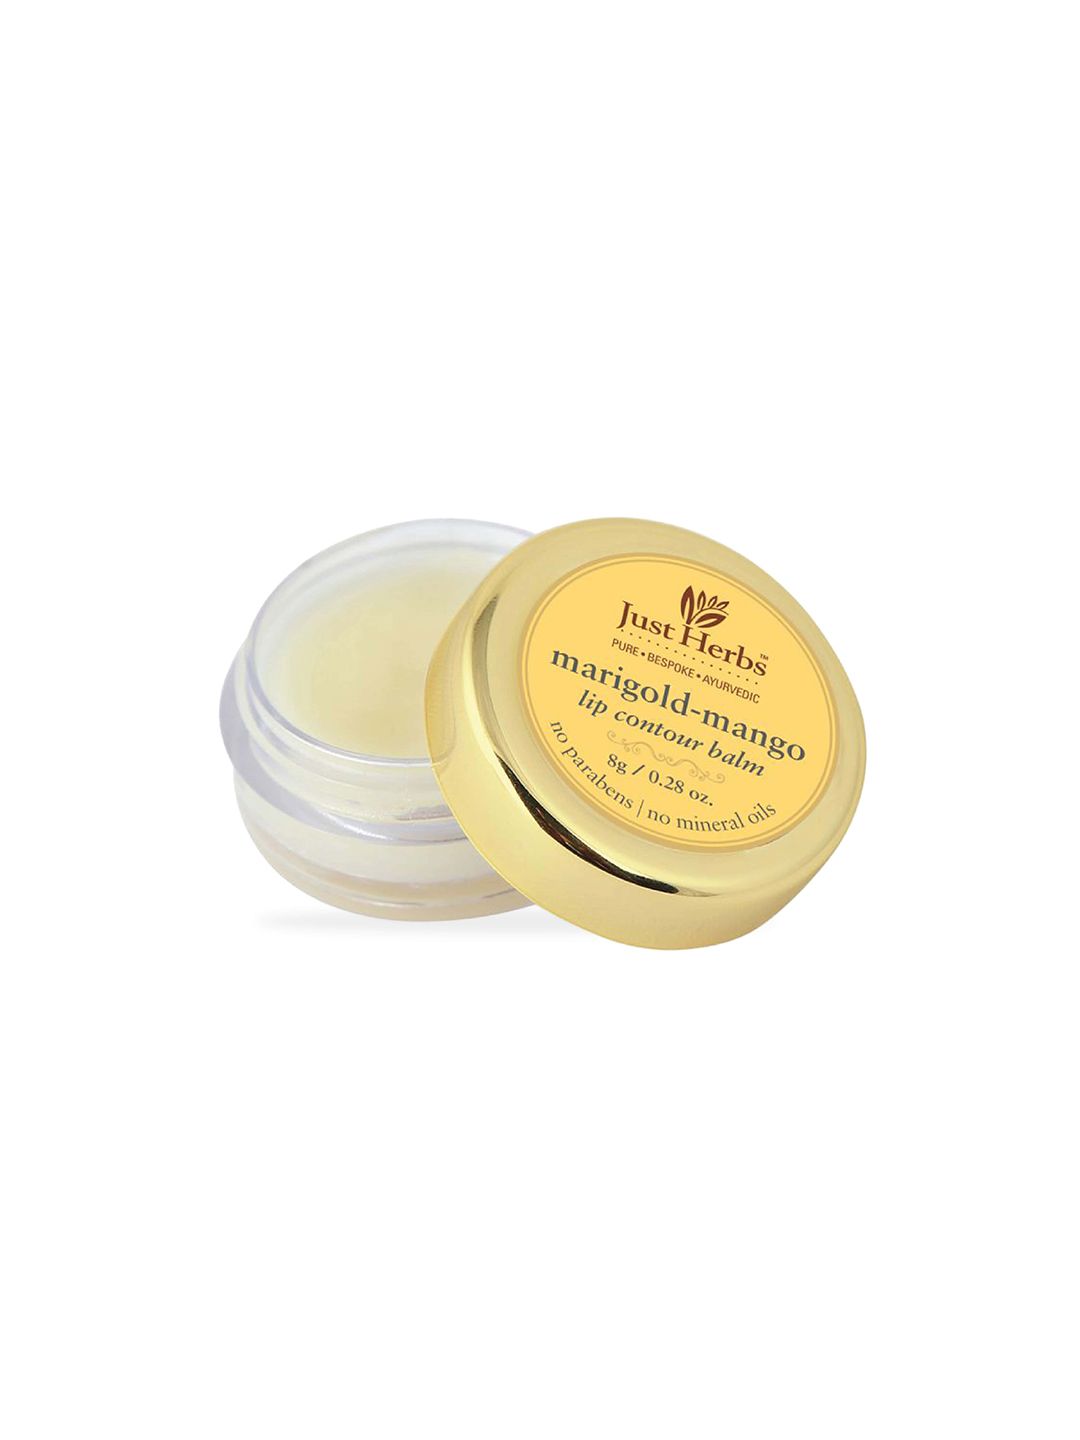 Just Herbs Mango Lip Balm With Mango & Marigold For Soft Lips - 8g Price in India